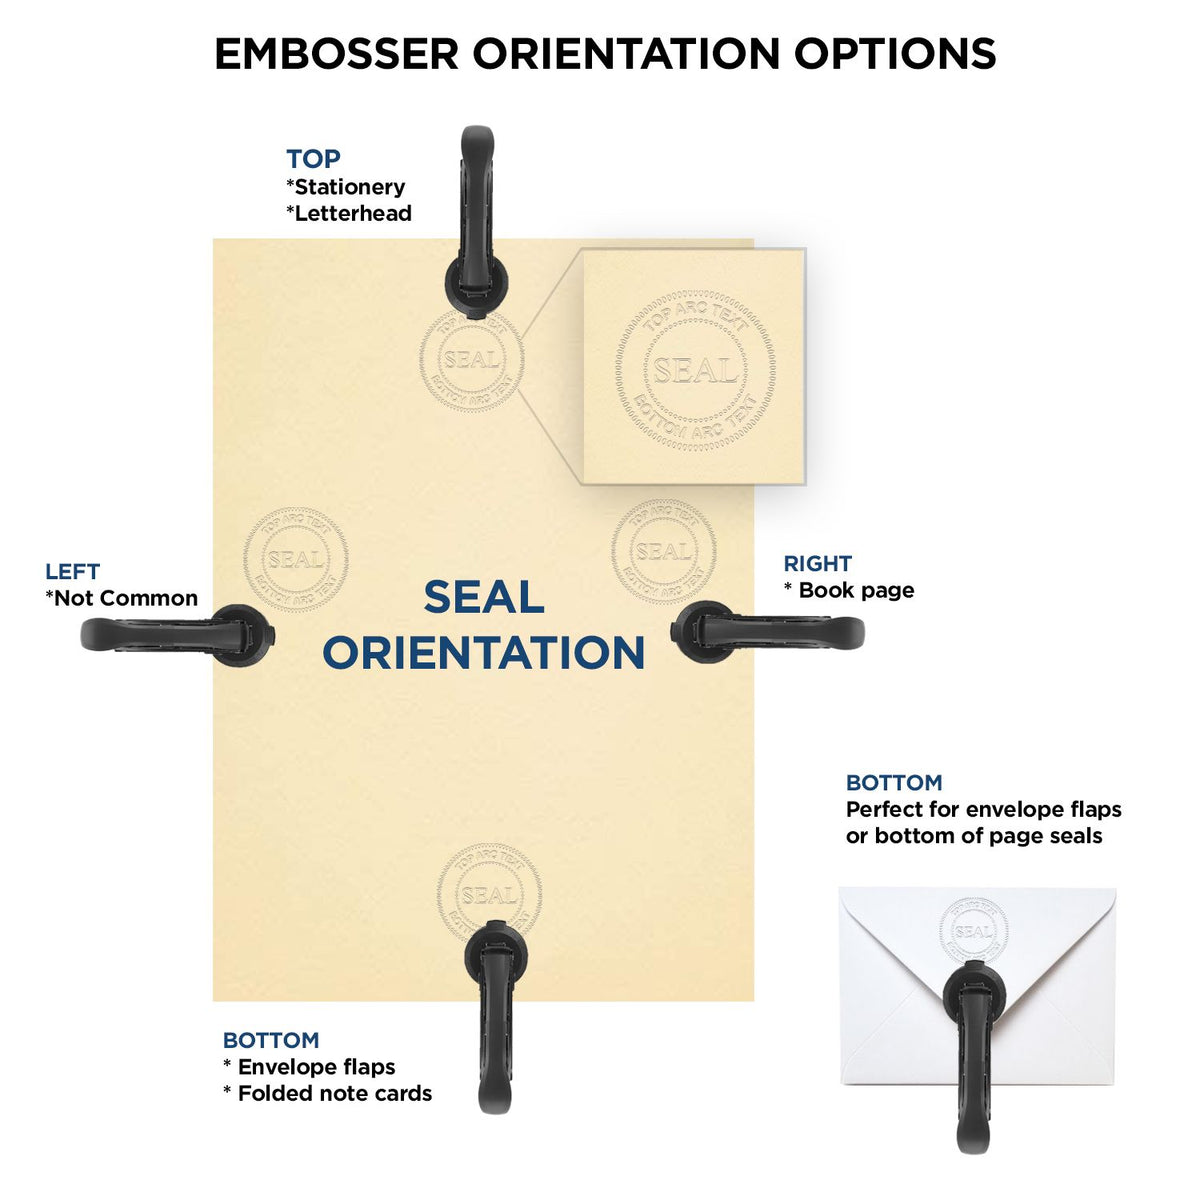 An infographic for the Arizona Geologist Desk Seal showing embosser orientation, this is showing examples of a top, bottom, right and left insert.